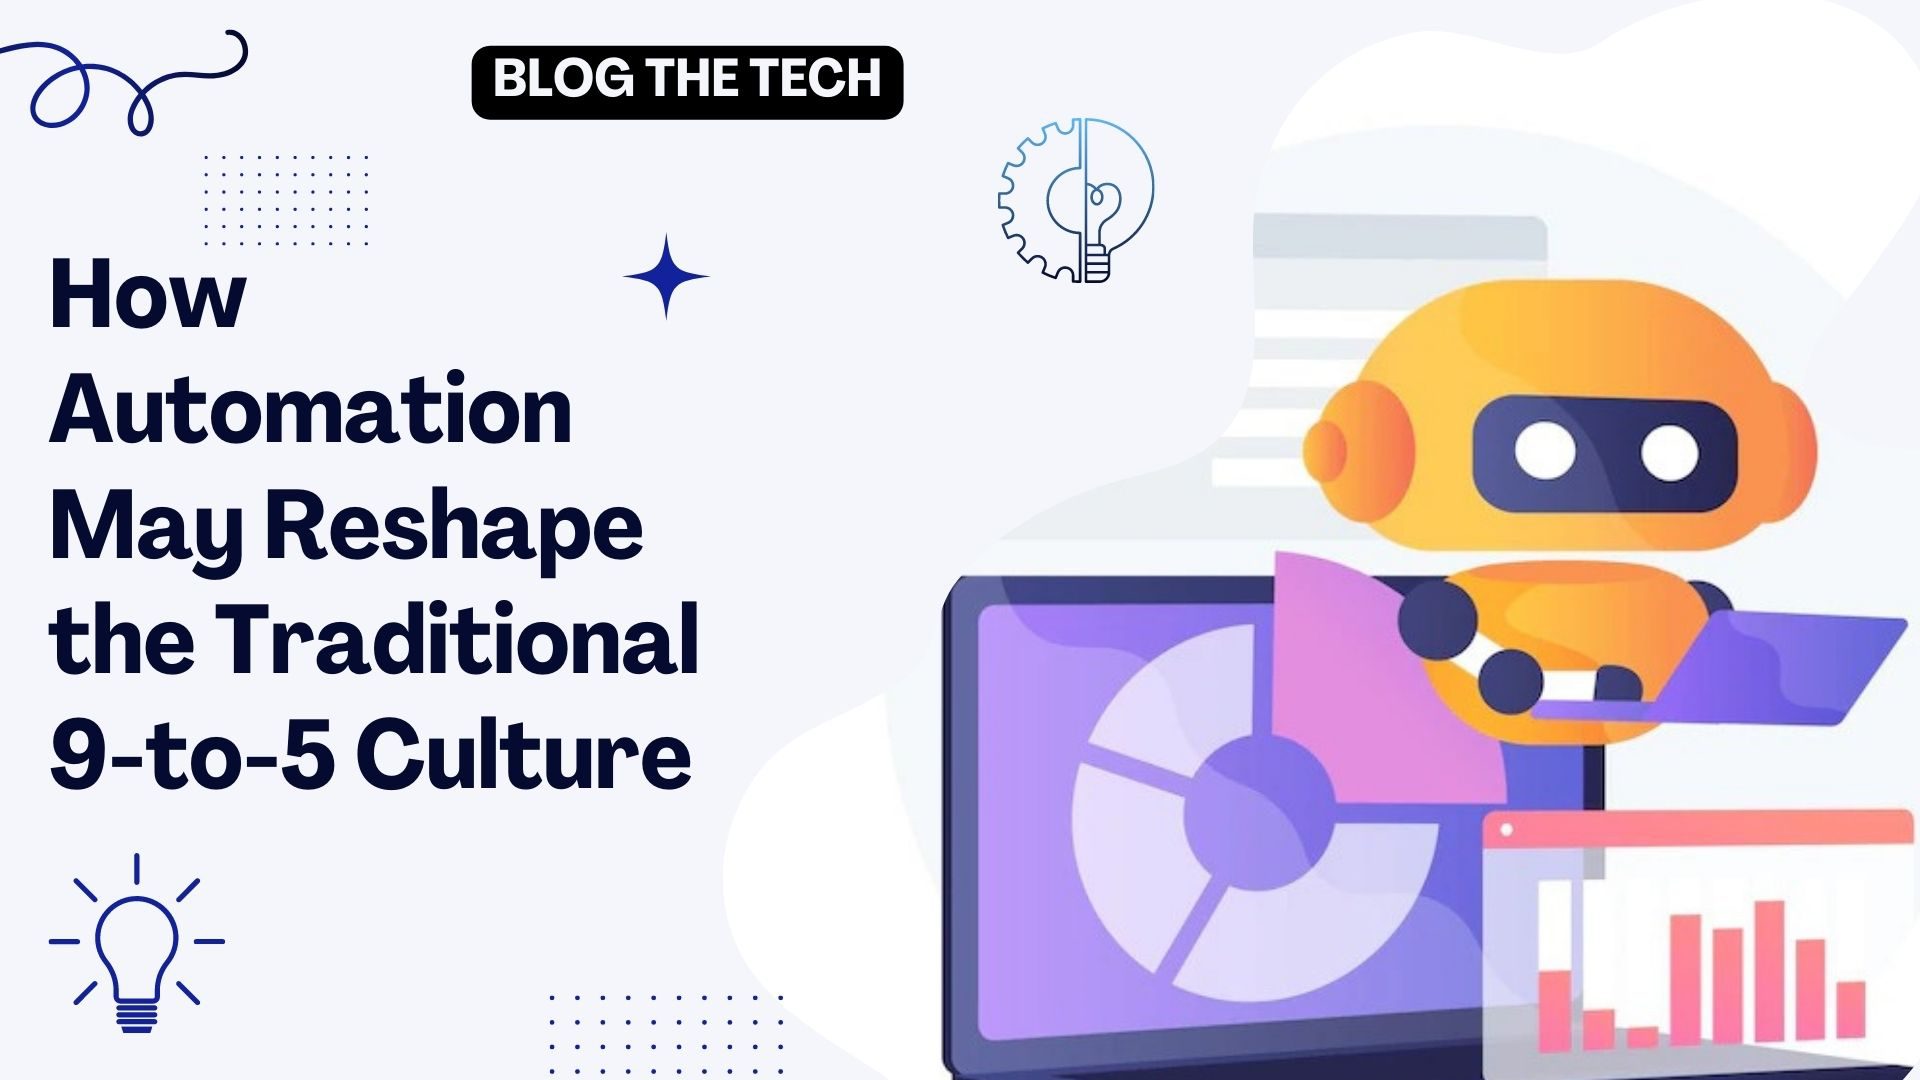 How Automation May Reshape the Traditional 9-to-5 Culture